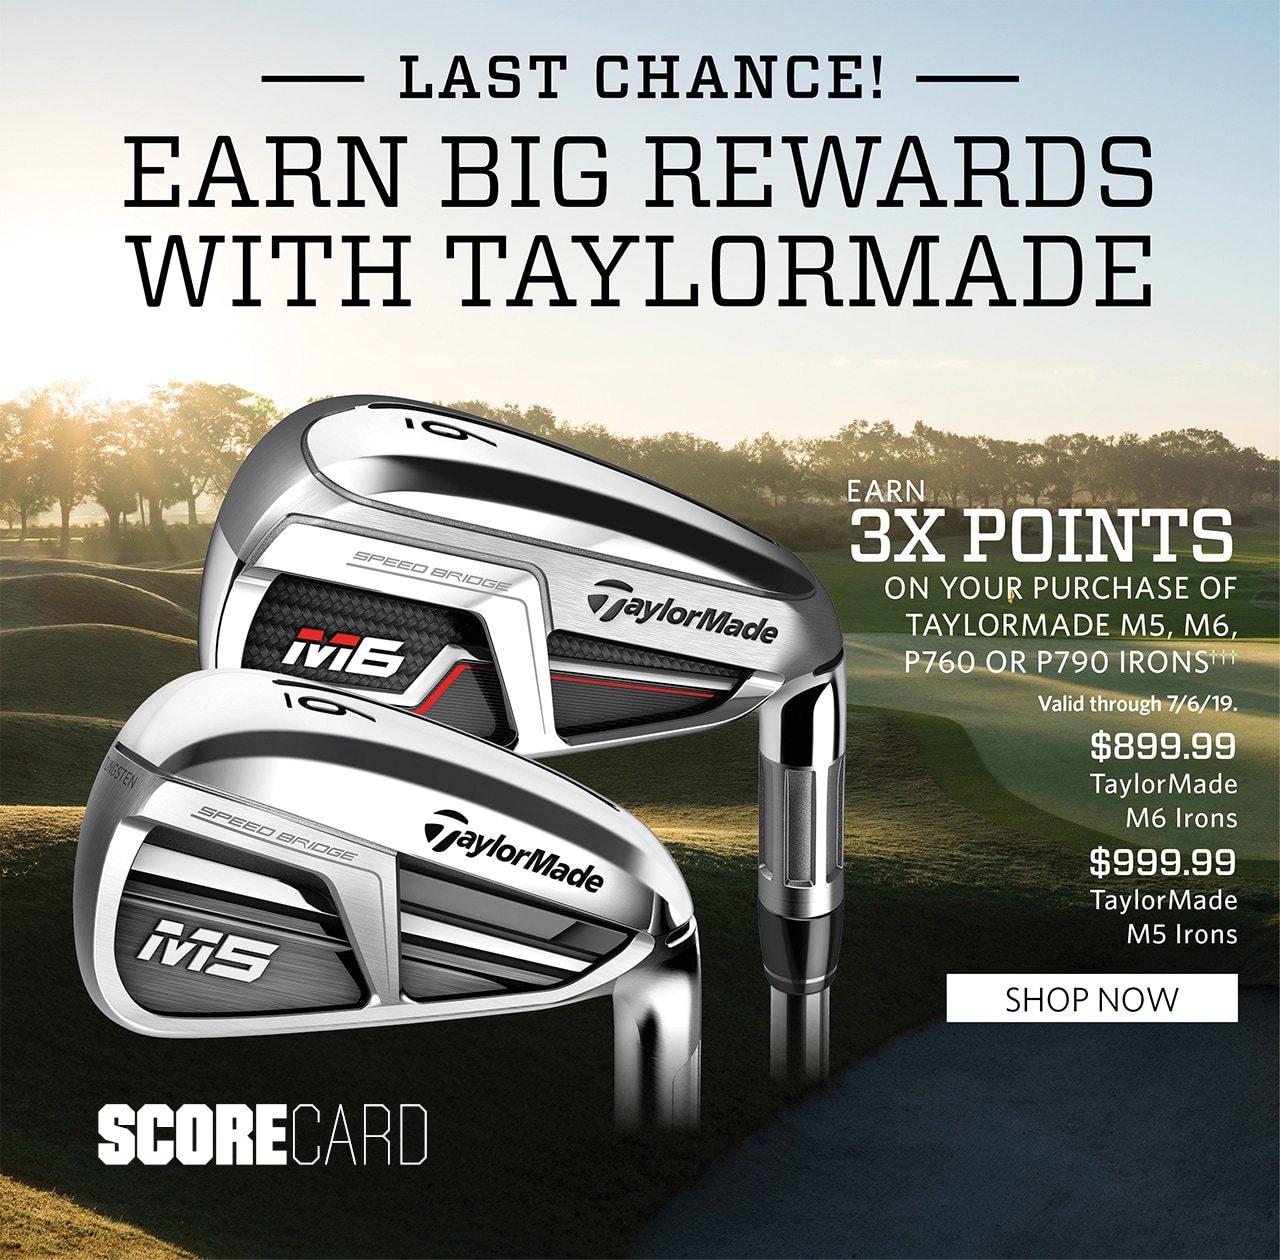 Earn Big Rewards With Callaway and TaylorMade. Earn Triple Points on your purchase of Taylormade M5, M6, P760 or P790 ††† Valid through 7/6/19. $899.99, TaylorMade M6 Irons. $999.99, TaylorMade M5 Irons. SHOP NOW